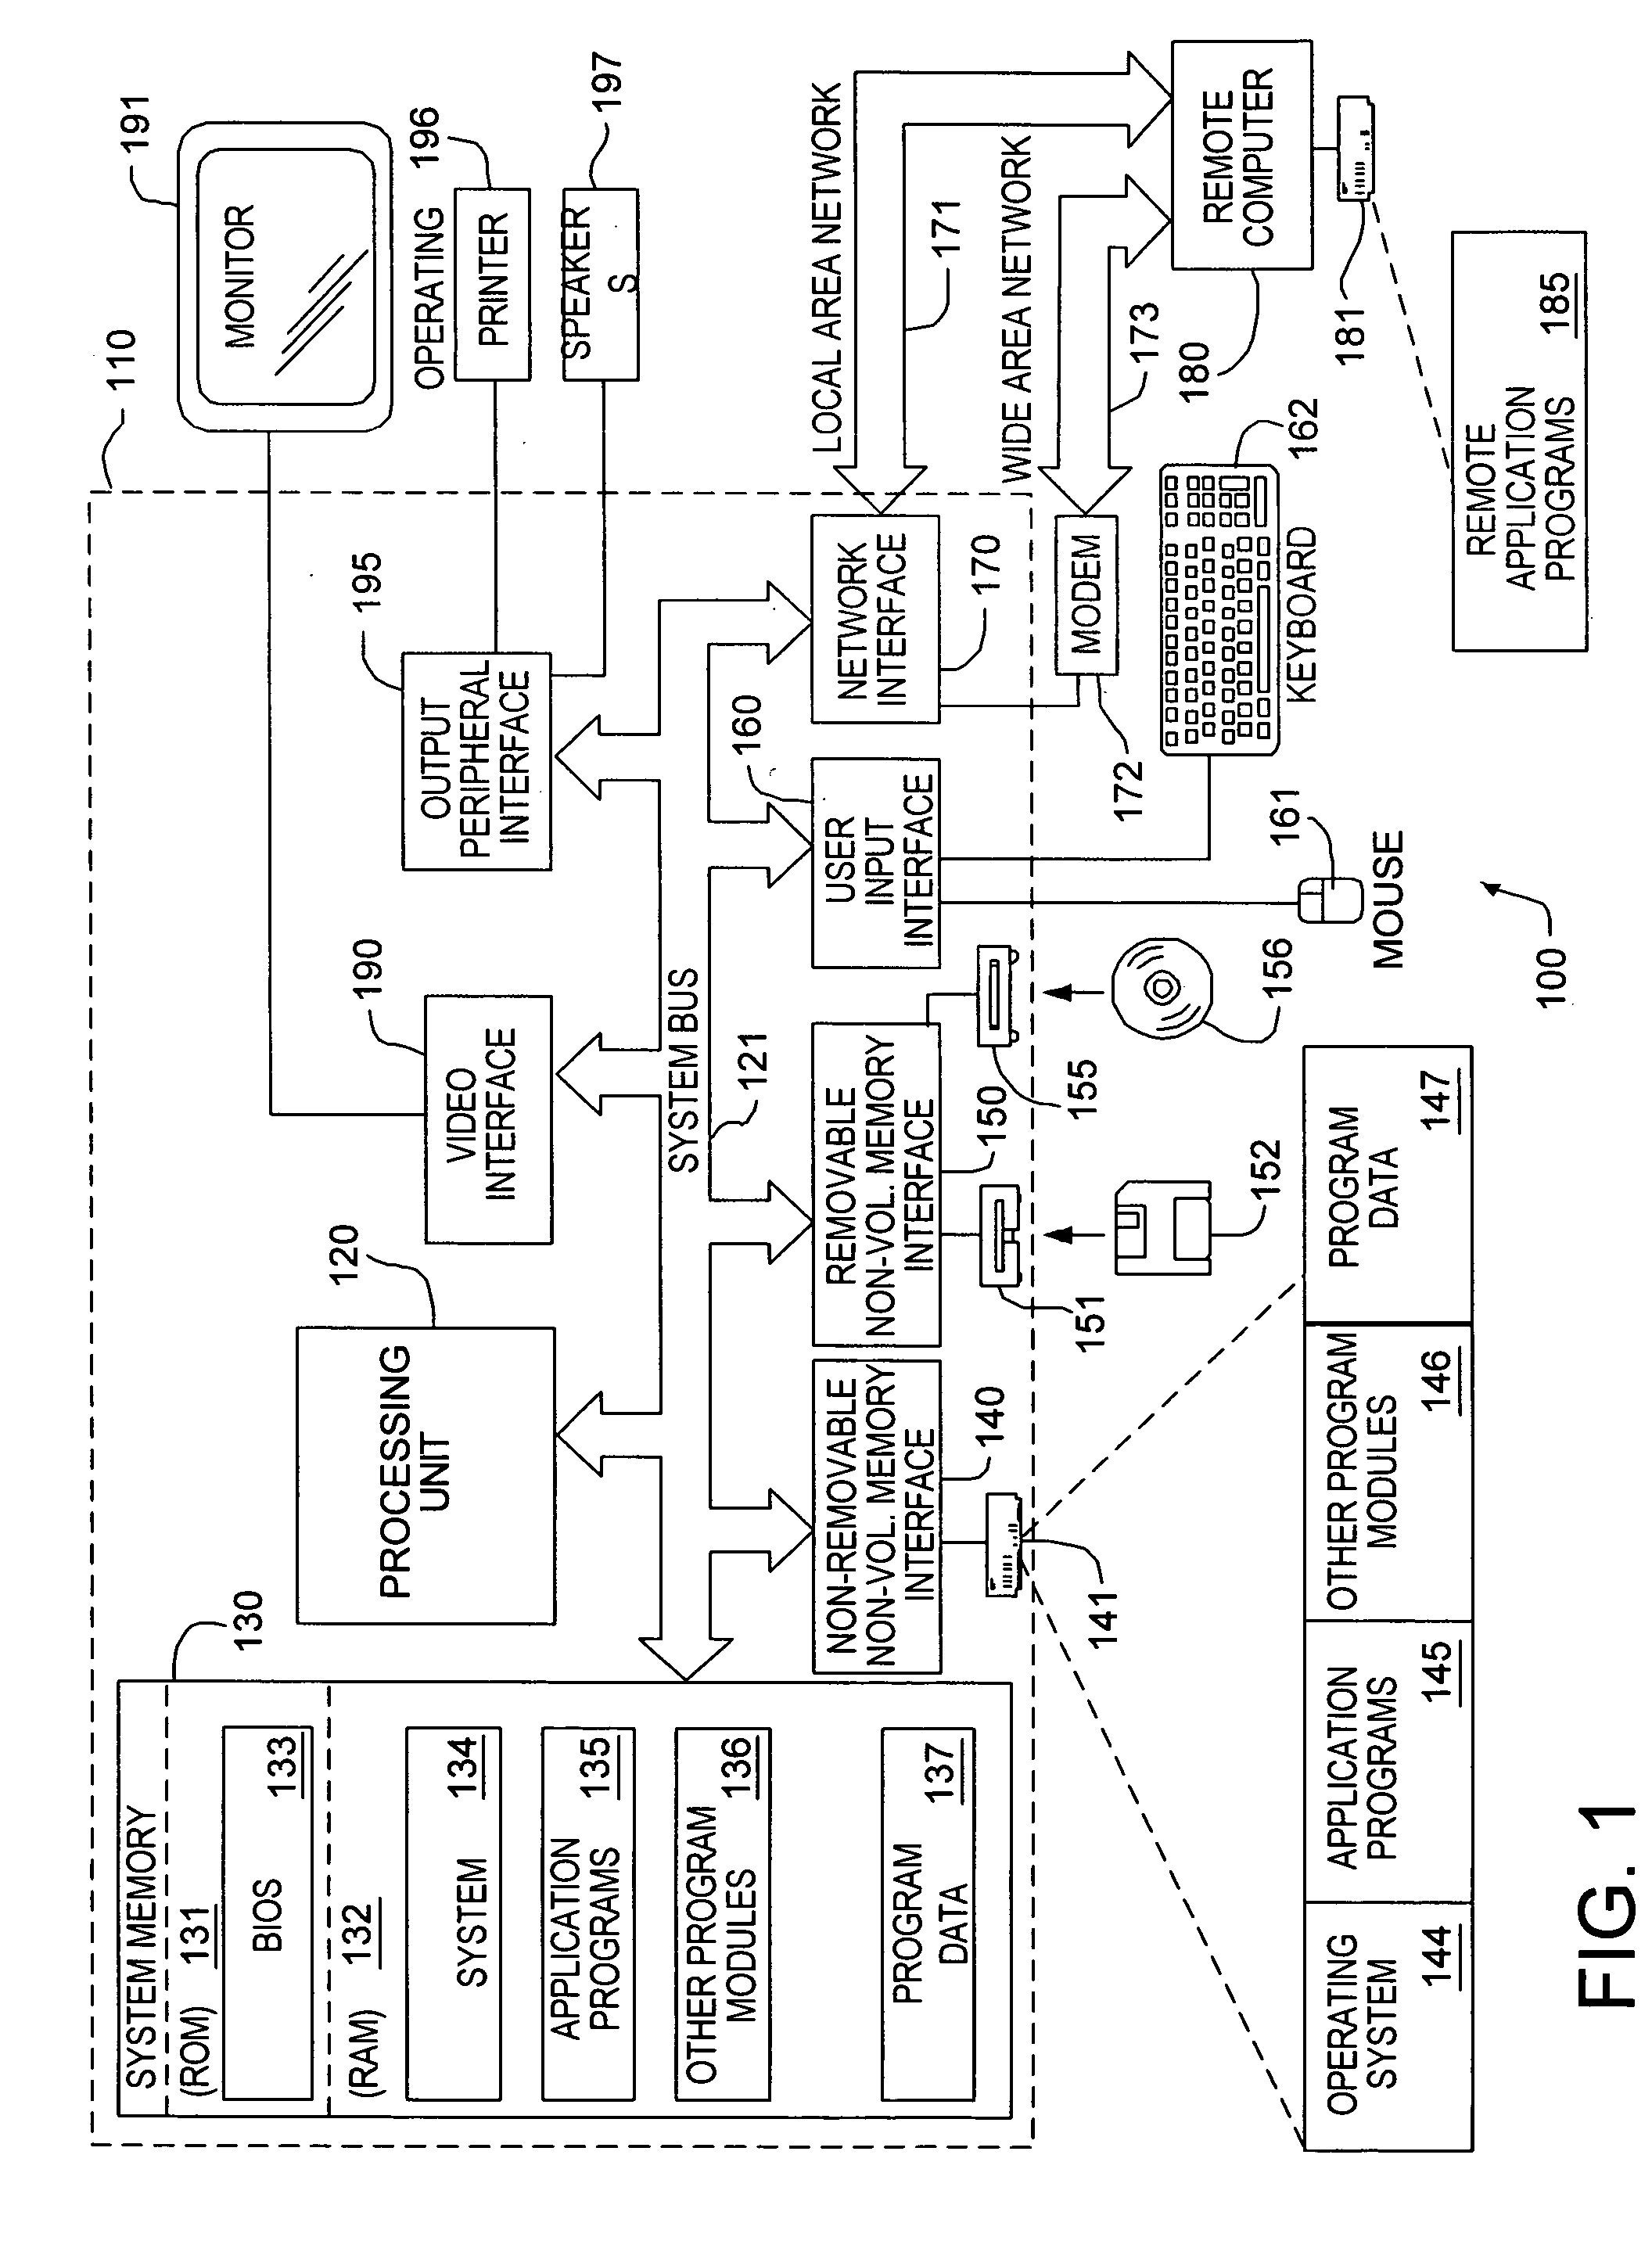 System and method for displaying stack icons